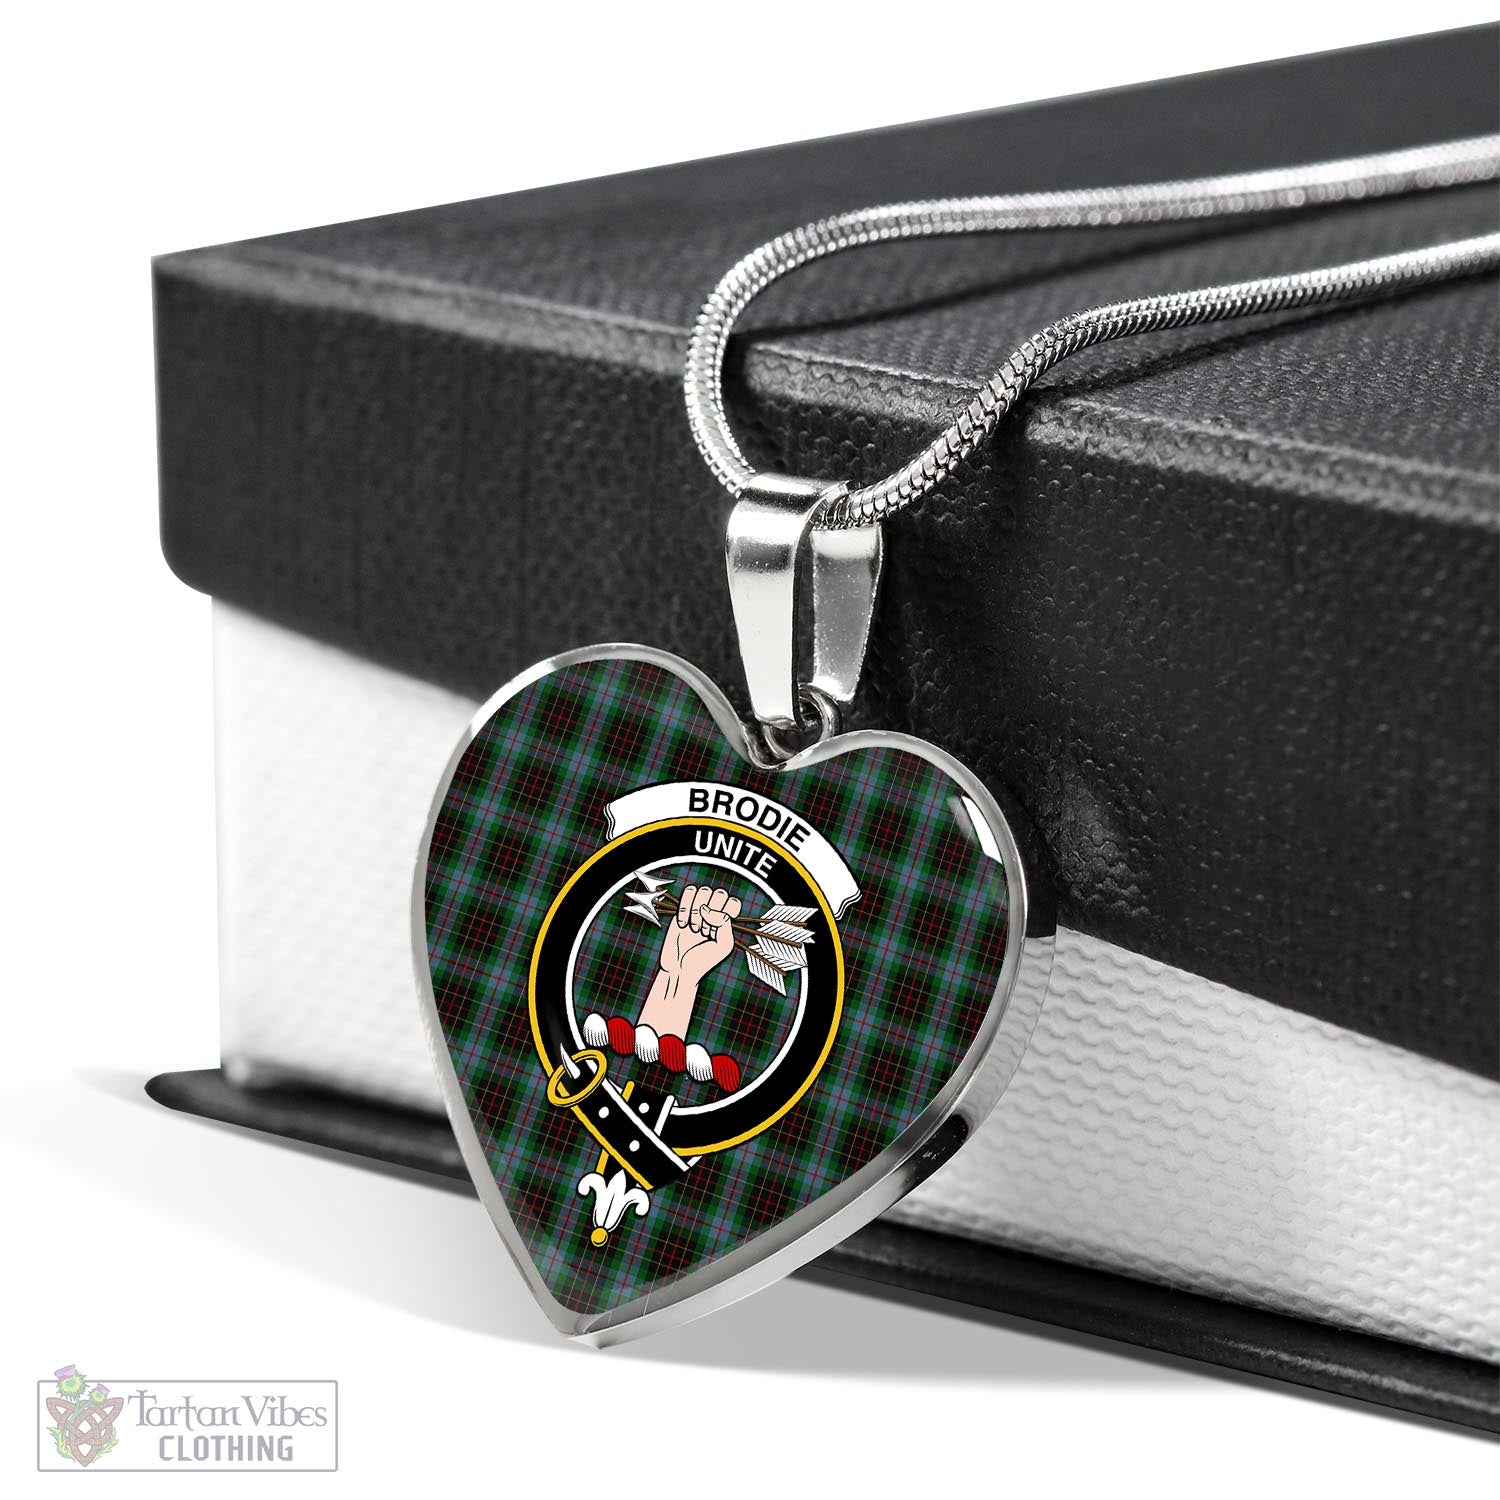 Tartan Vibes Clothing Brodie Hunting Tartan Heart Necklace with Family Crest